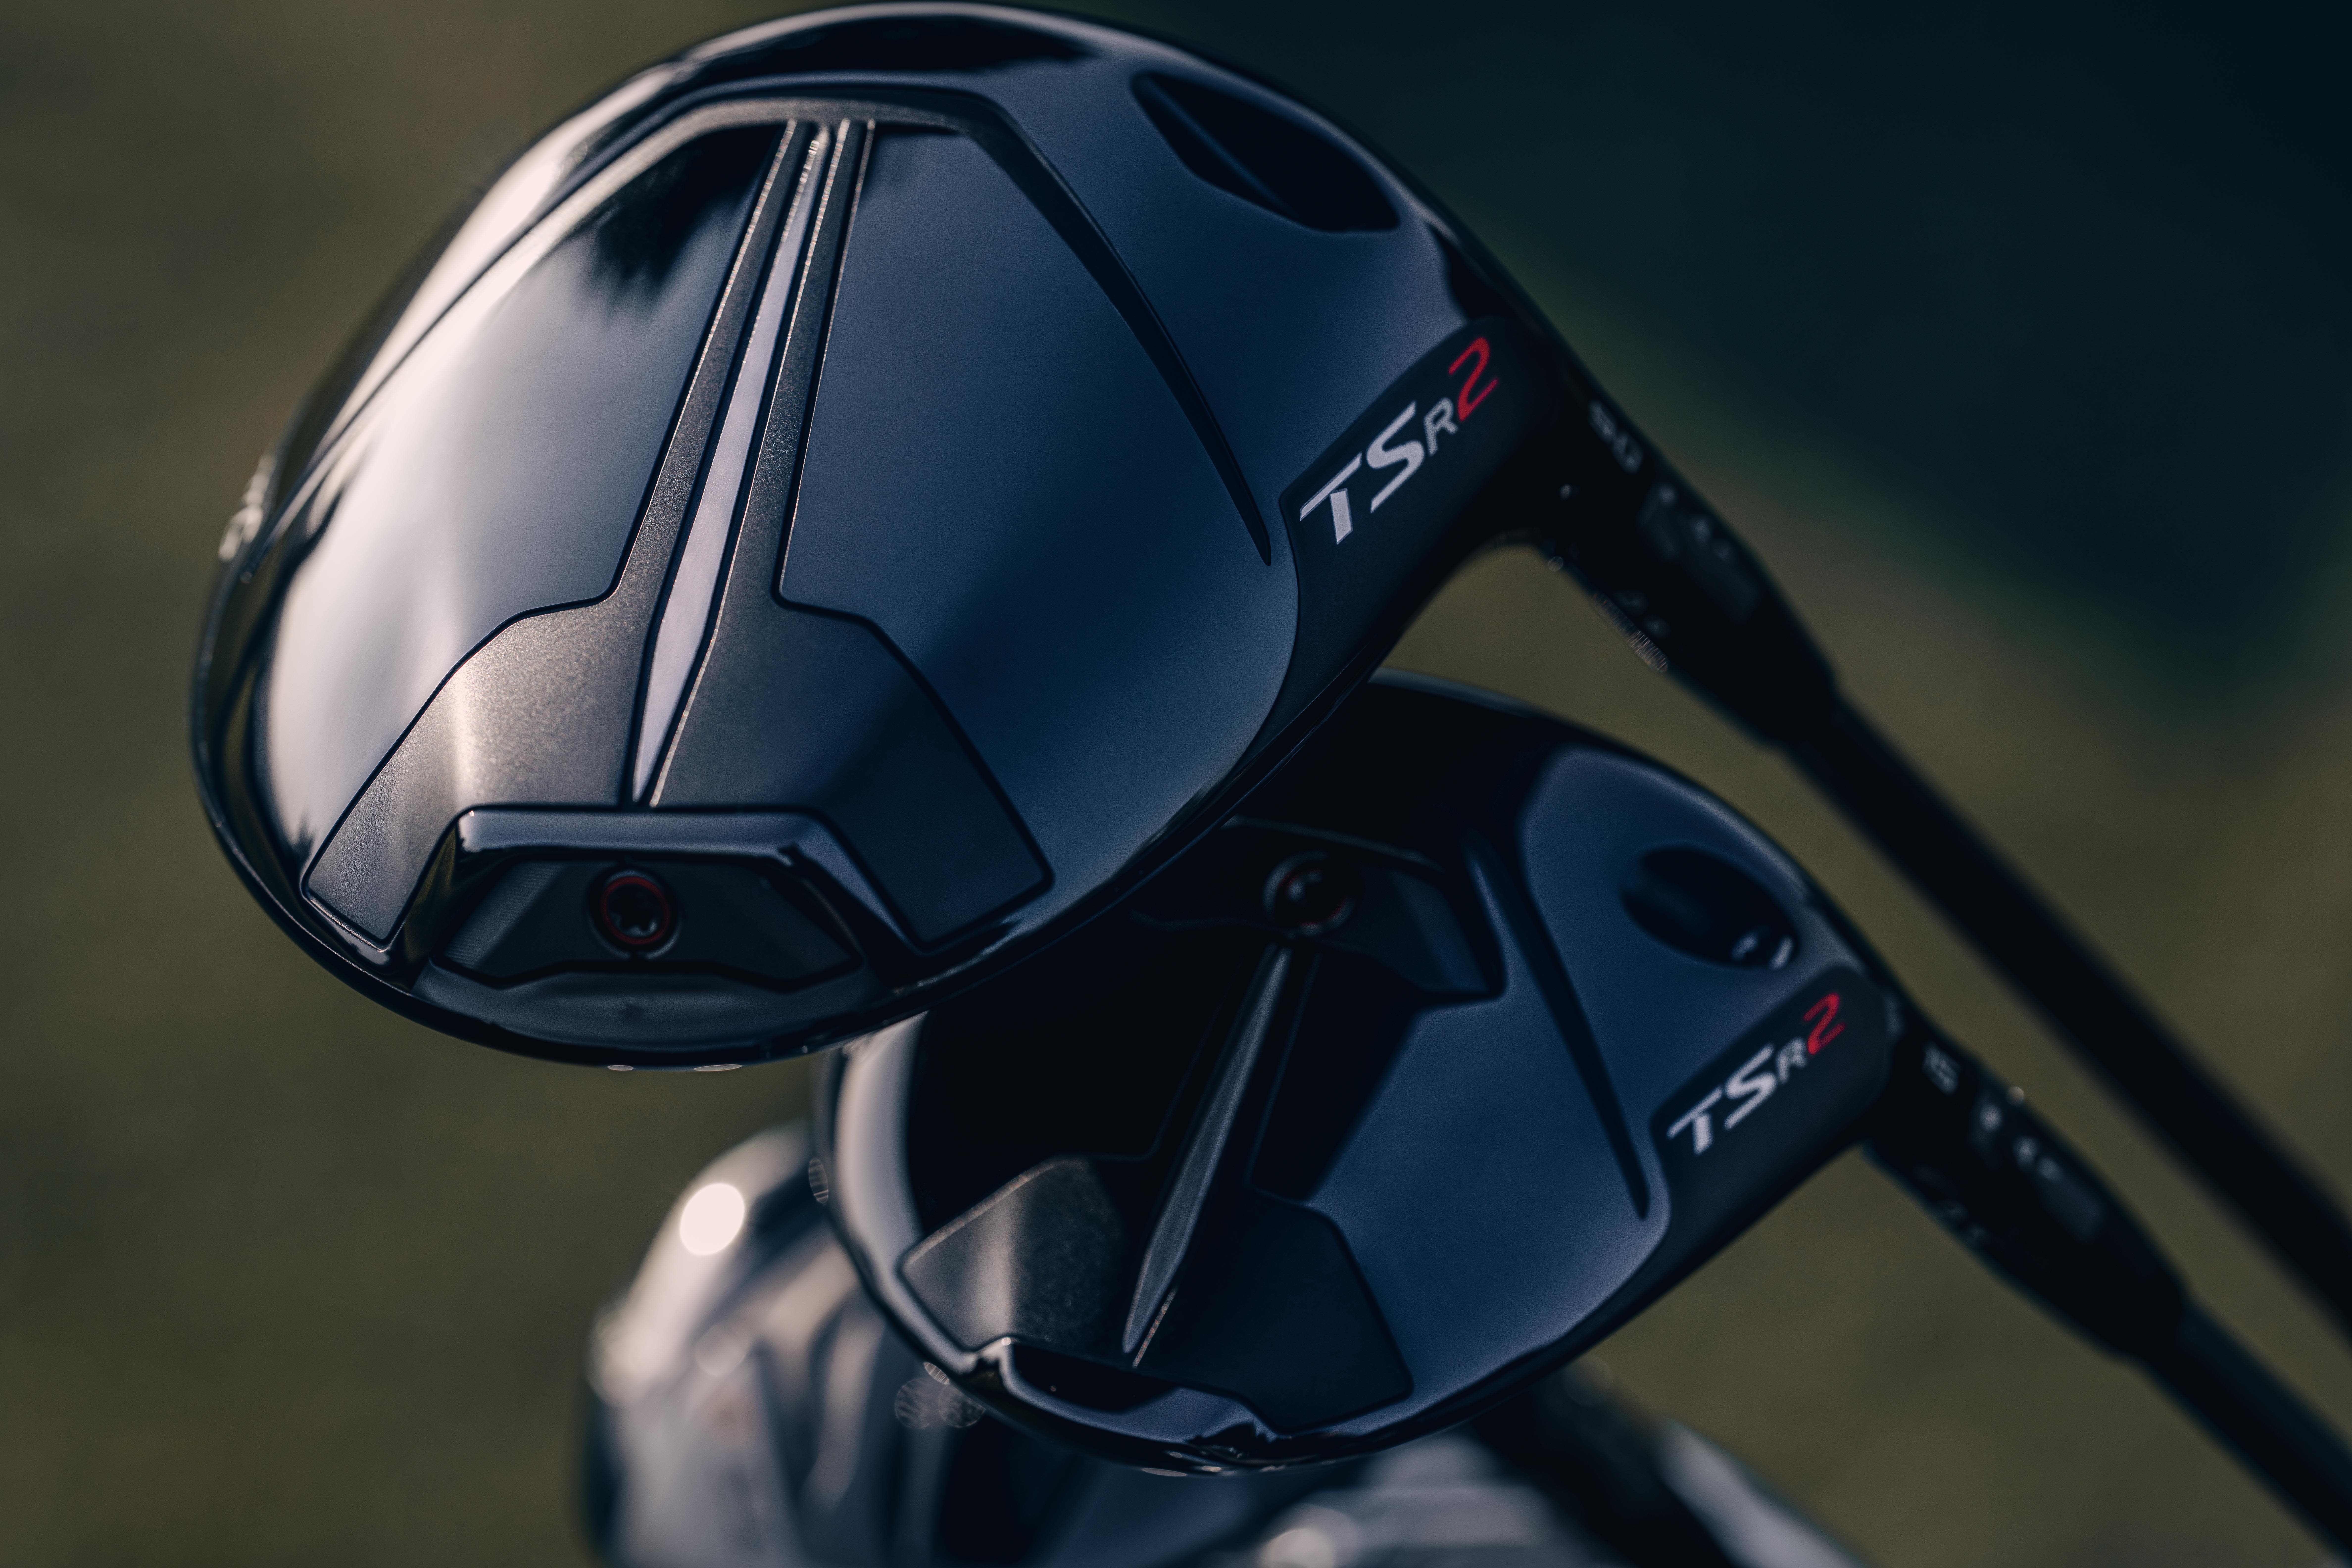 The new TSR2 driver from Titleist (photo courtesy of Titleist).